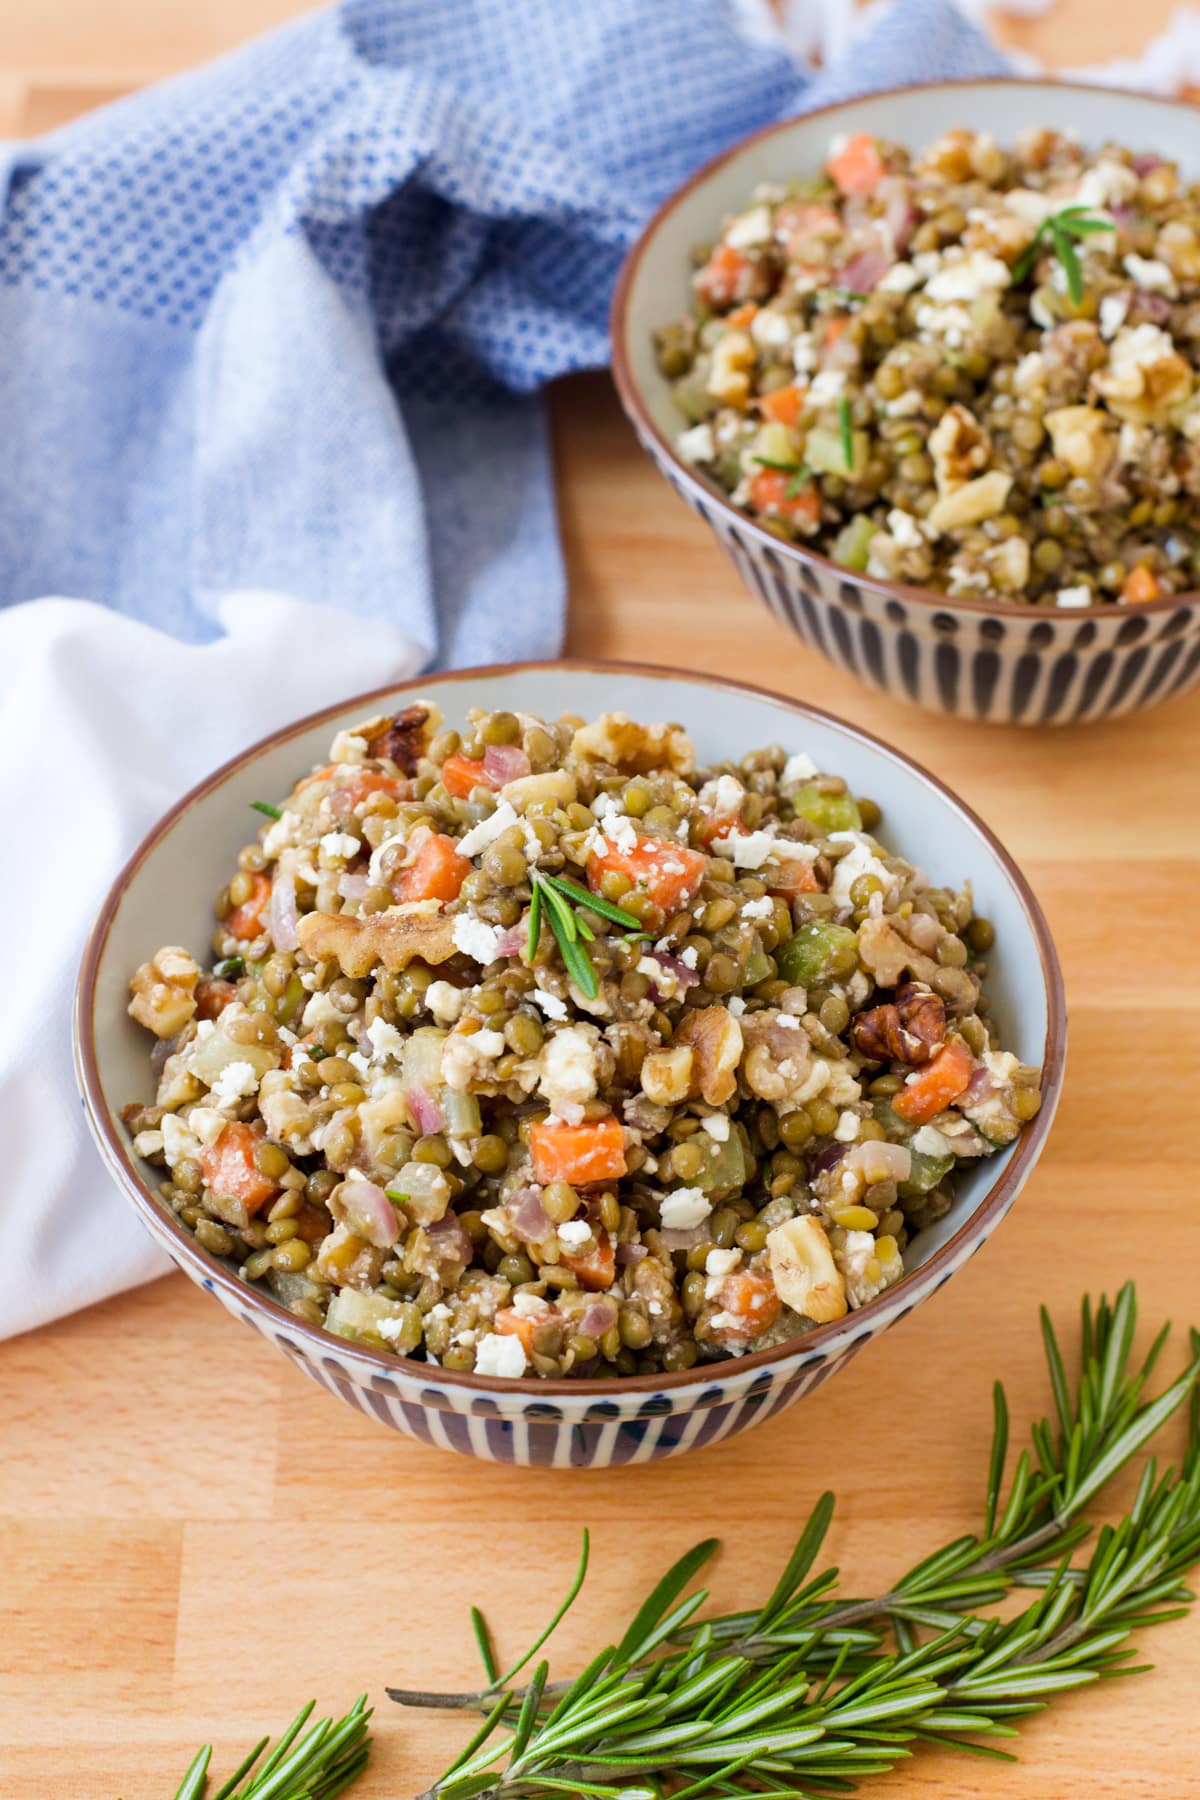 Lentil salad in round blue and white dish with chopped carrots and fresh sprig of rosemary.